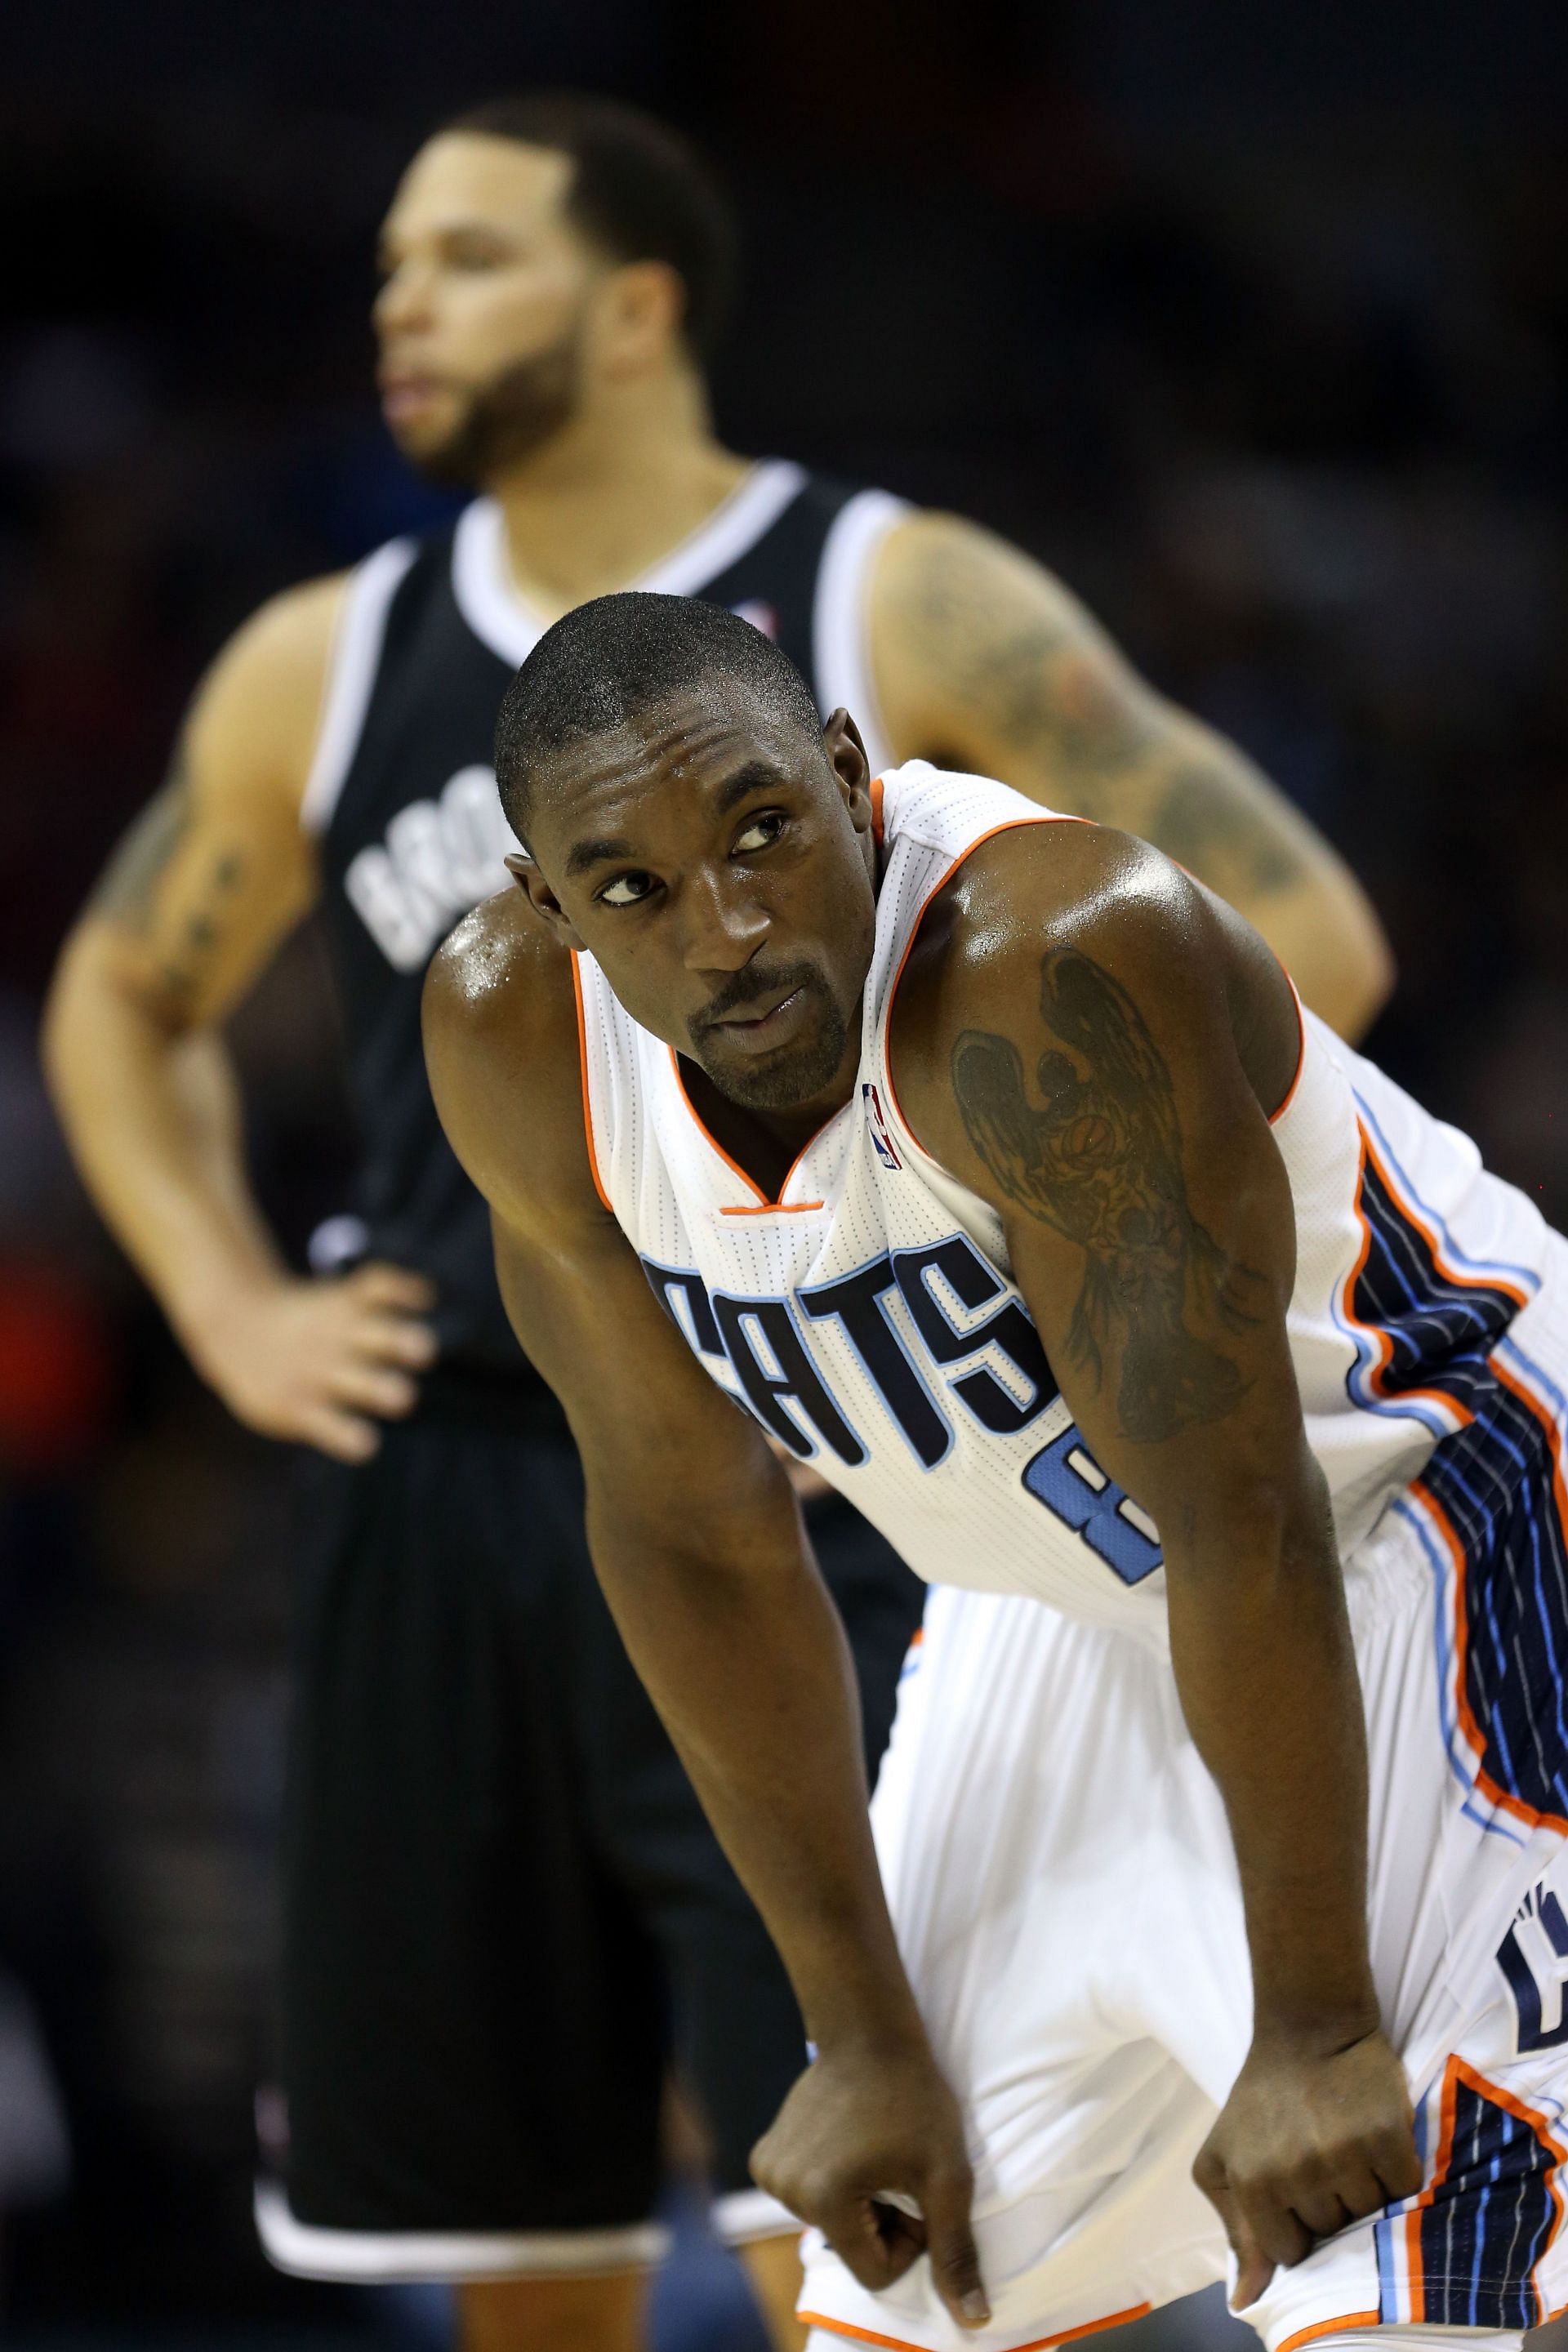 Ex-NBA star Ben Gordon shares how he coped with suicidal thoughts